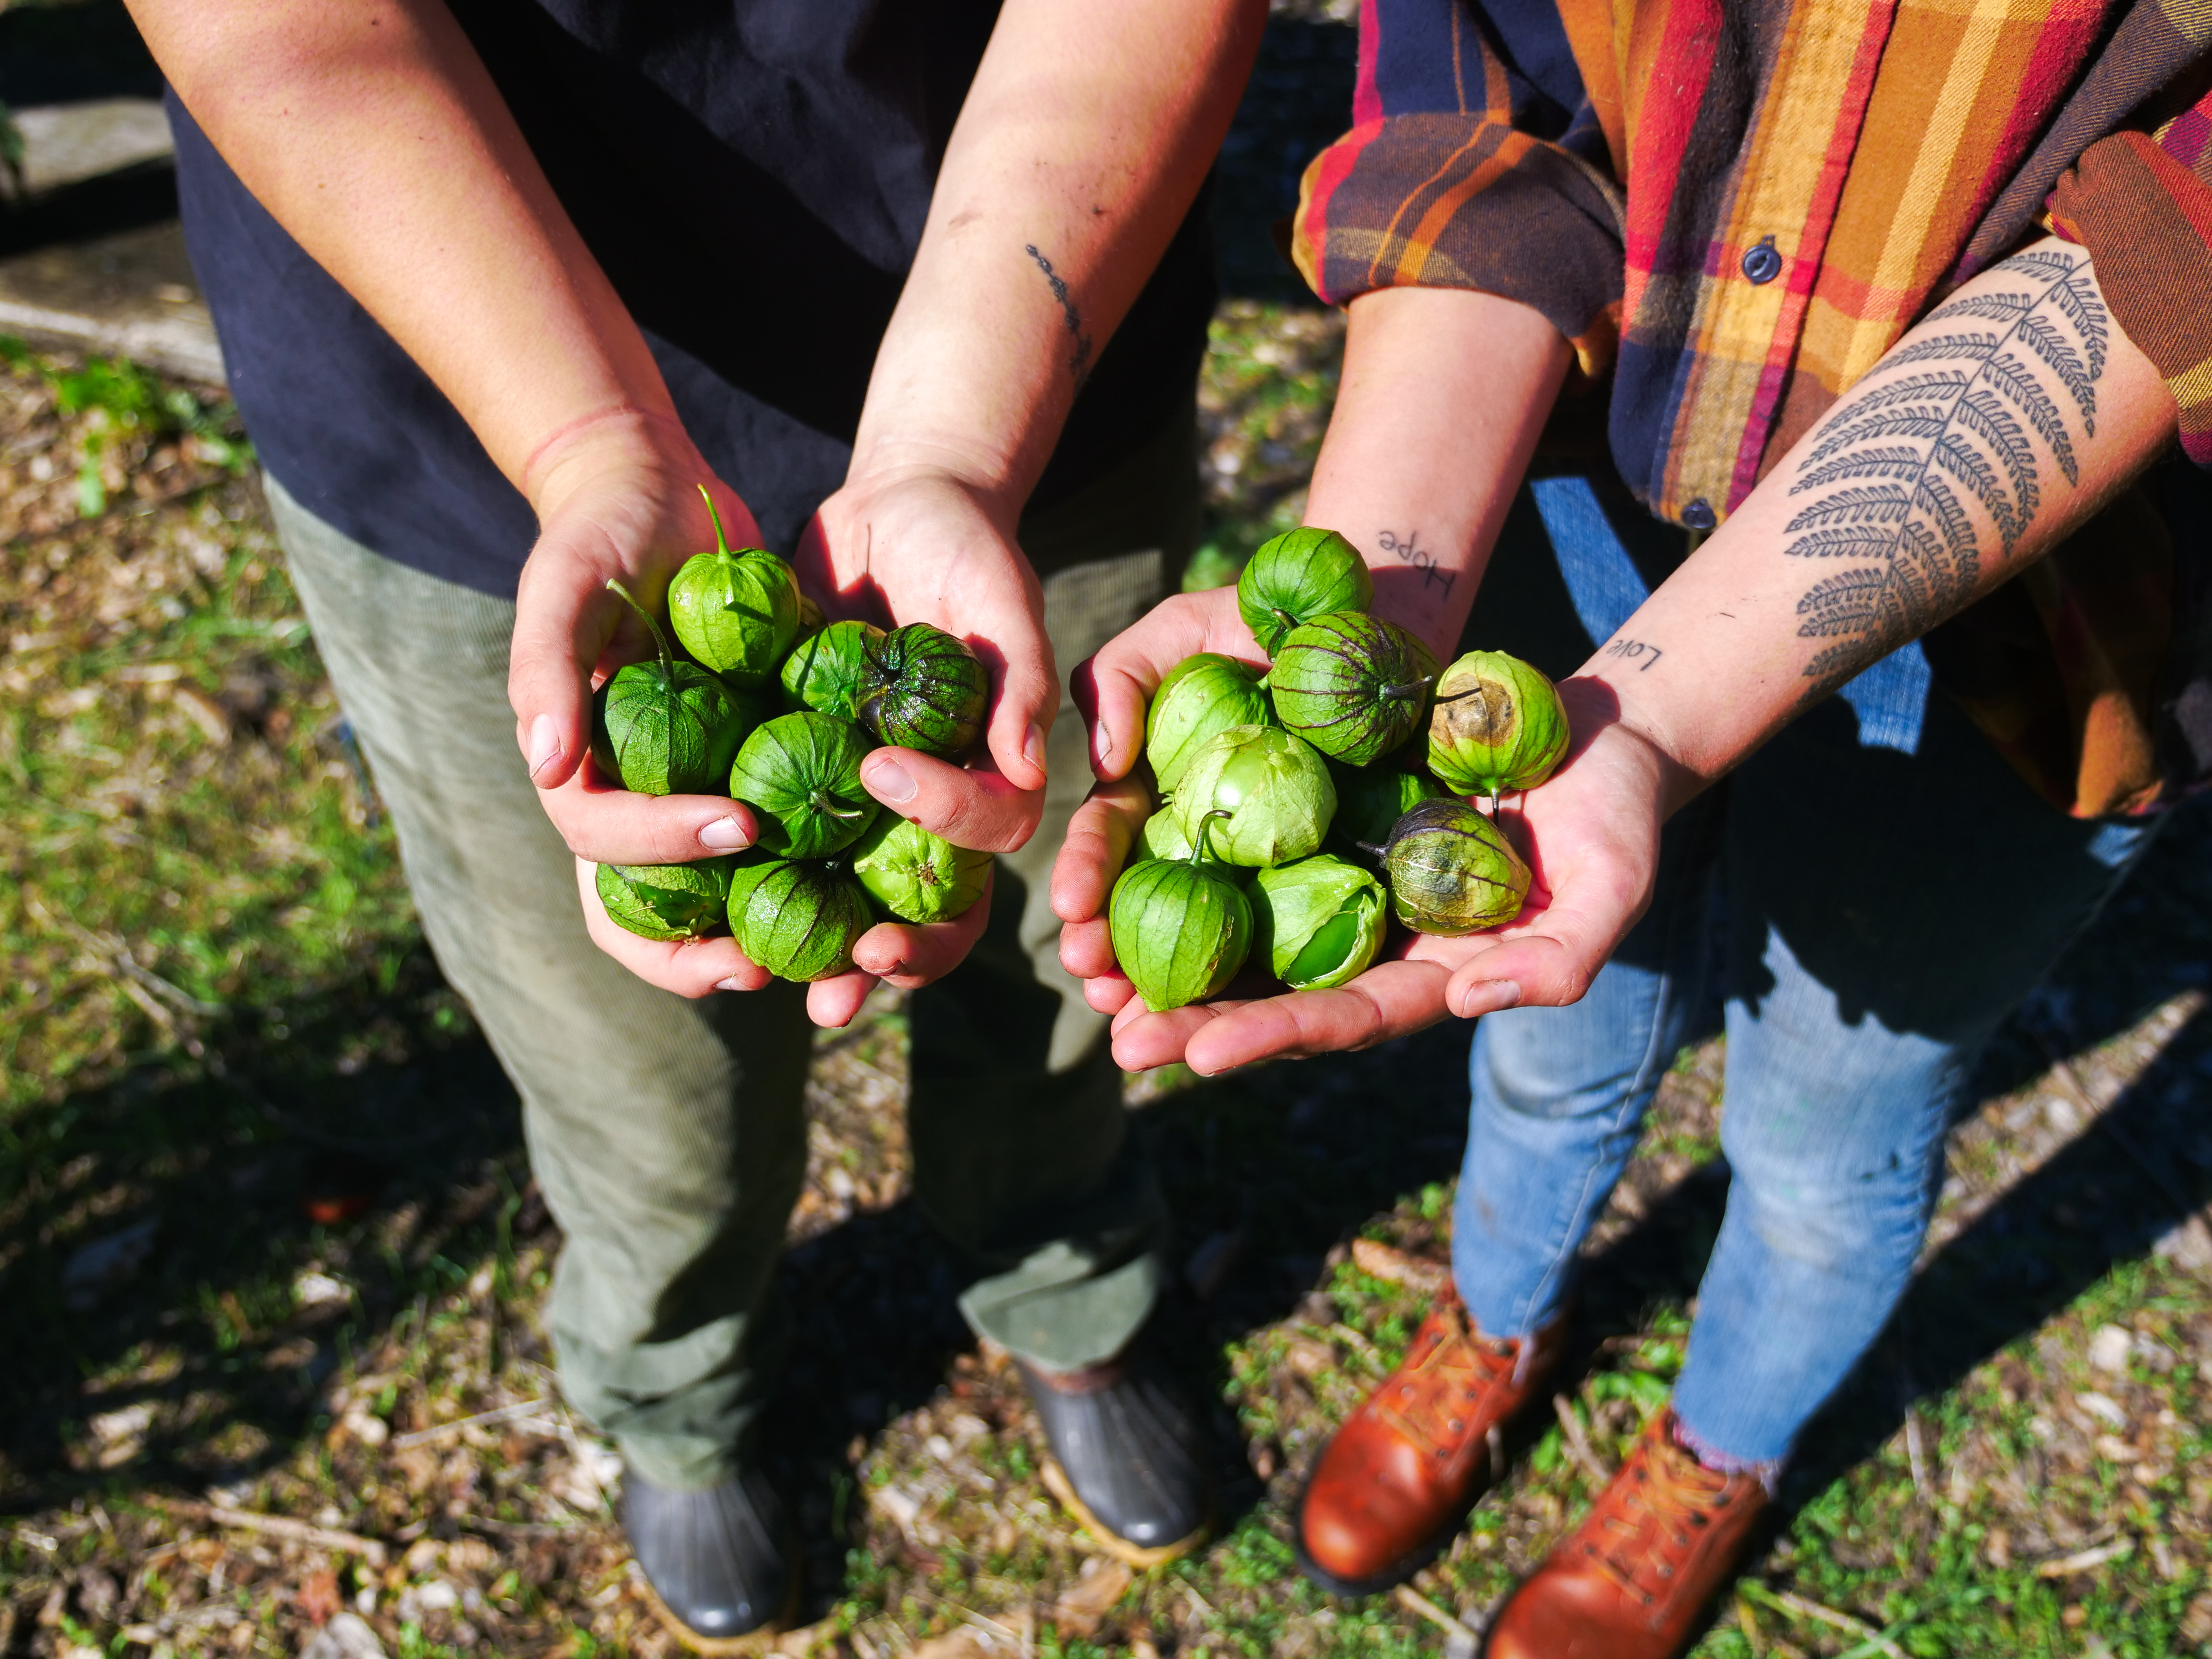 Students hold up tomatillos from the campus garden